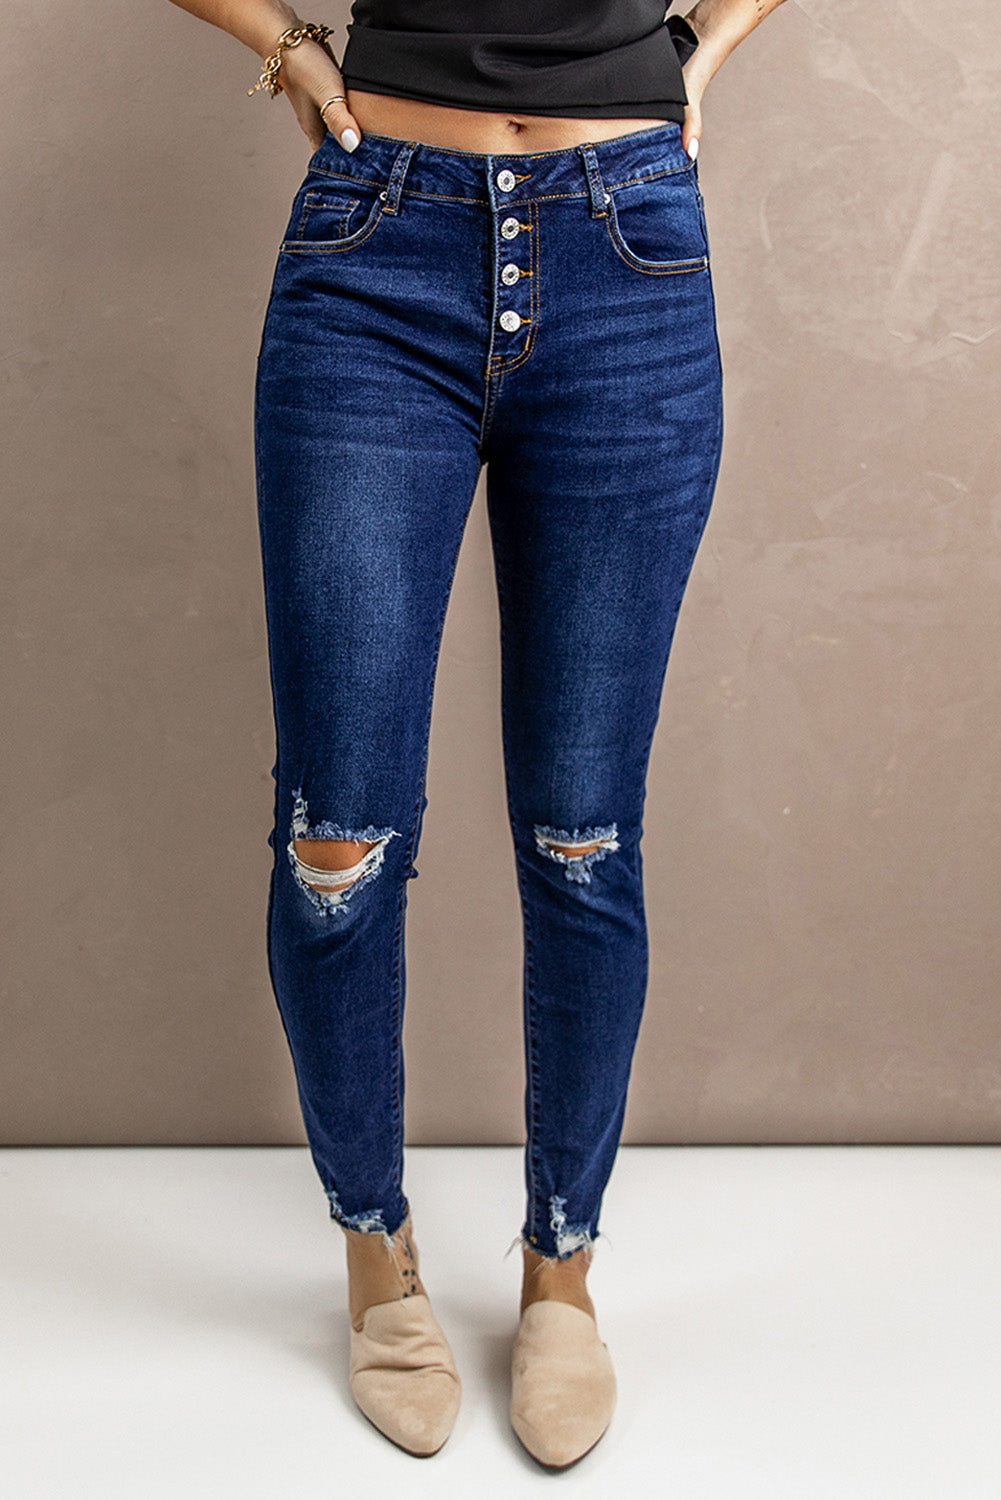 Distressed Button Fly Skinny Jeans | Skinny Jeans For Women - Alaena James Boutique